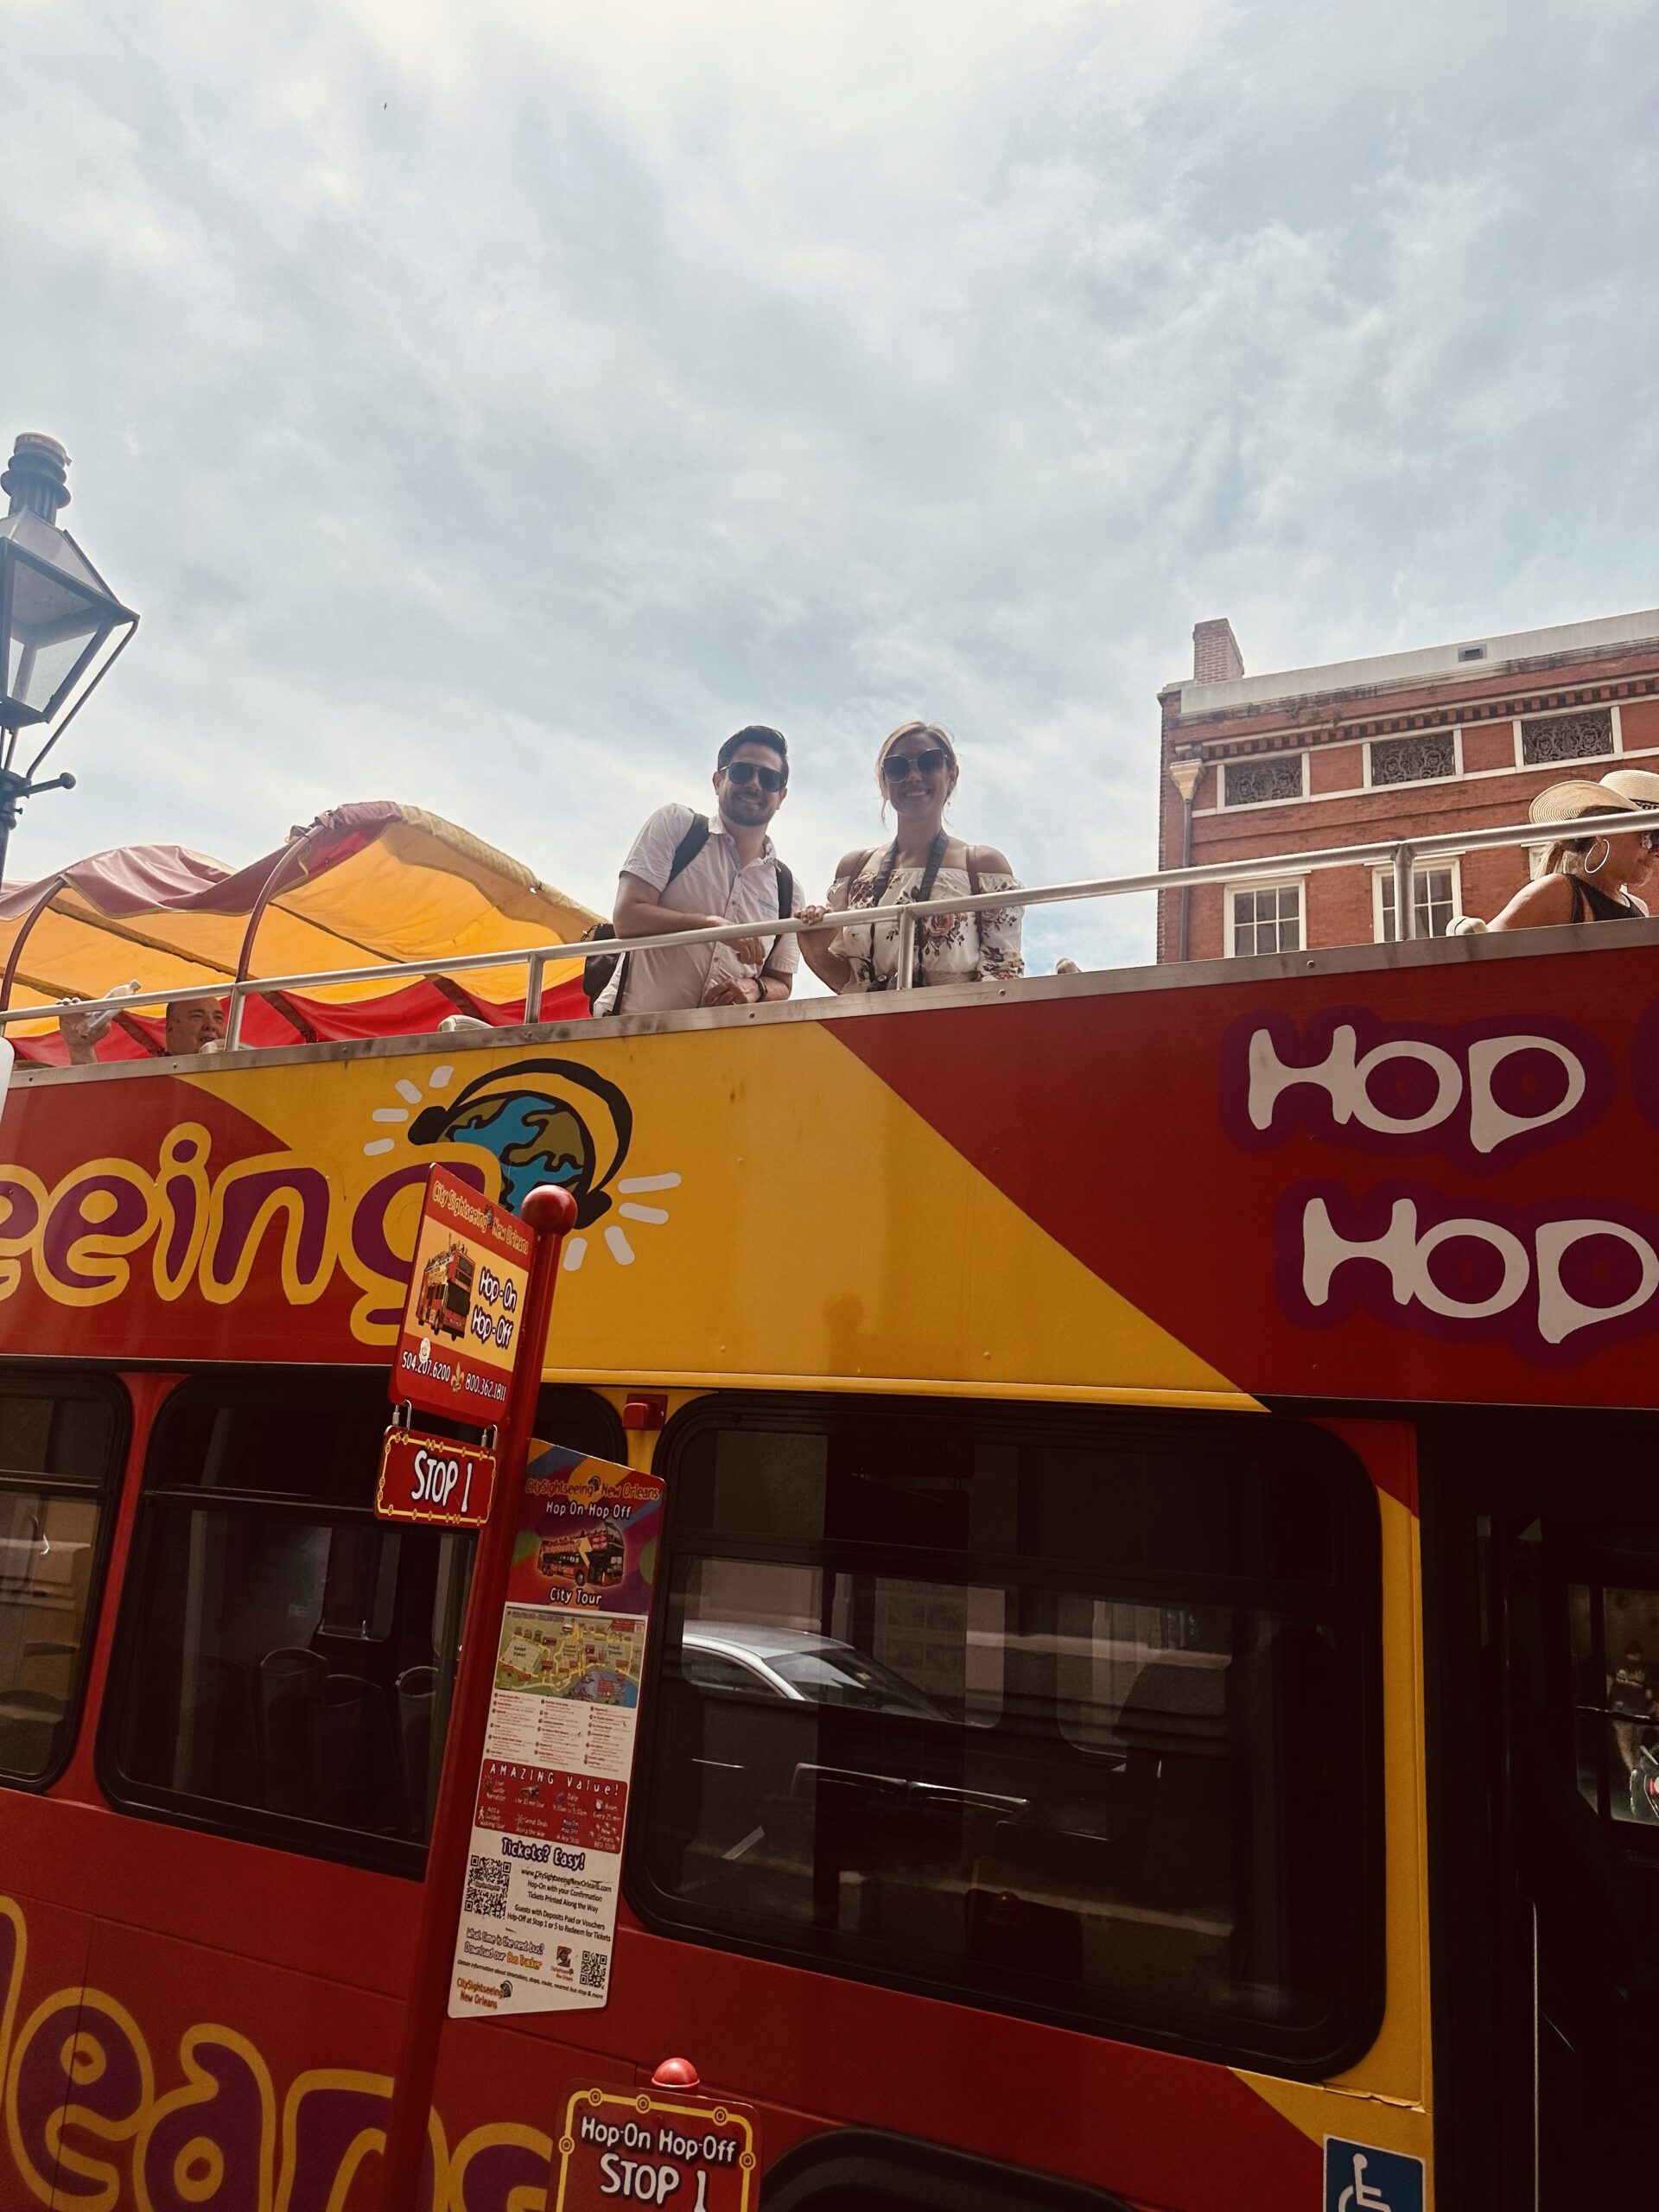 One of the Best ways to see New Orleans – Tour and Transportation – The Hop On Hop Off Bus Tour